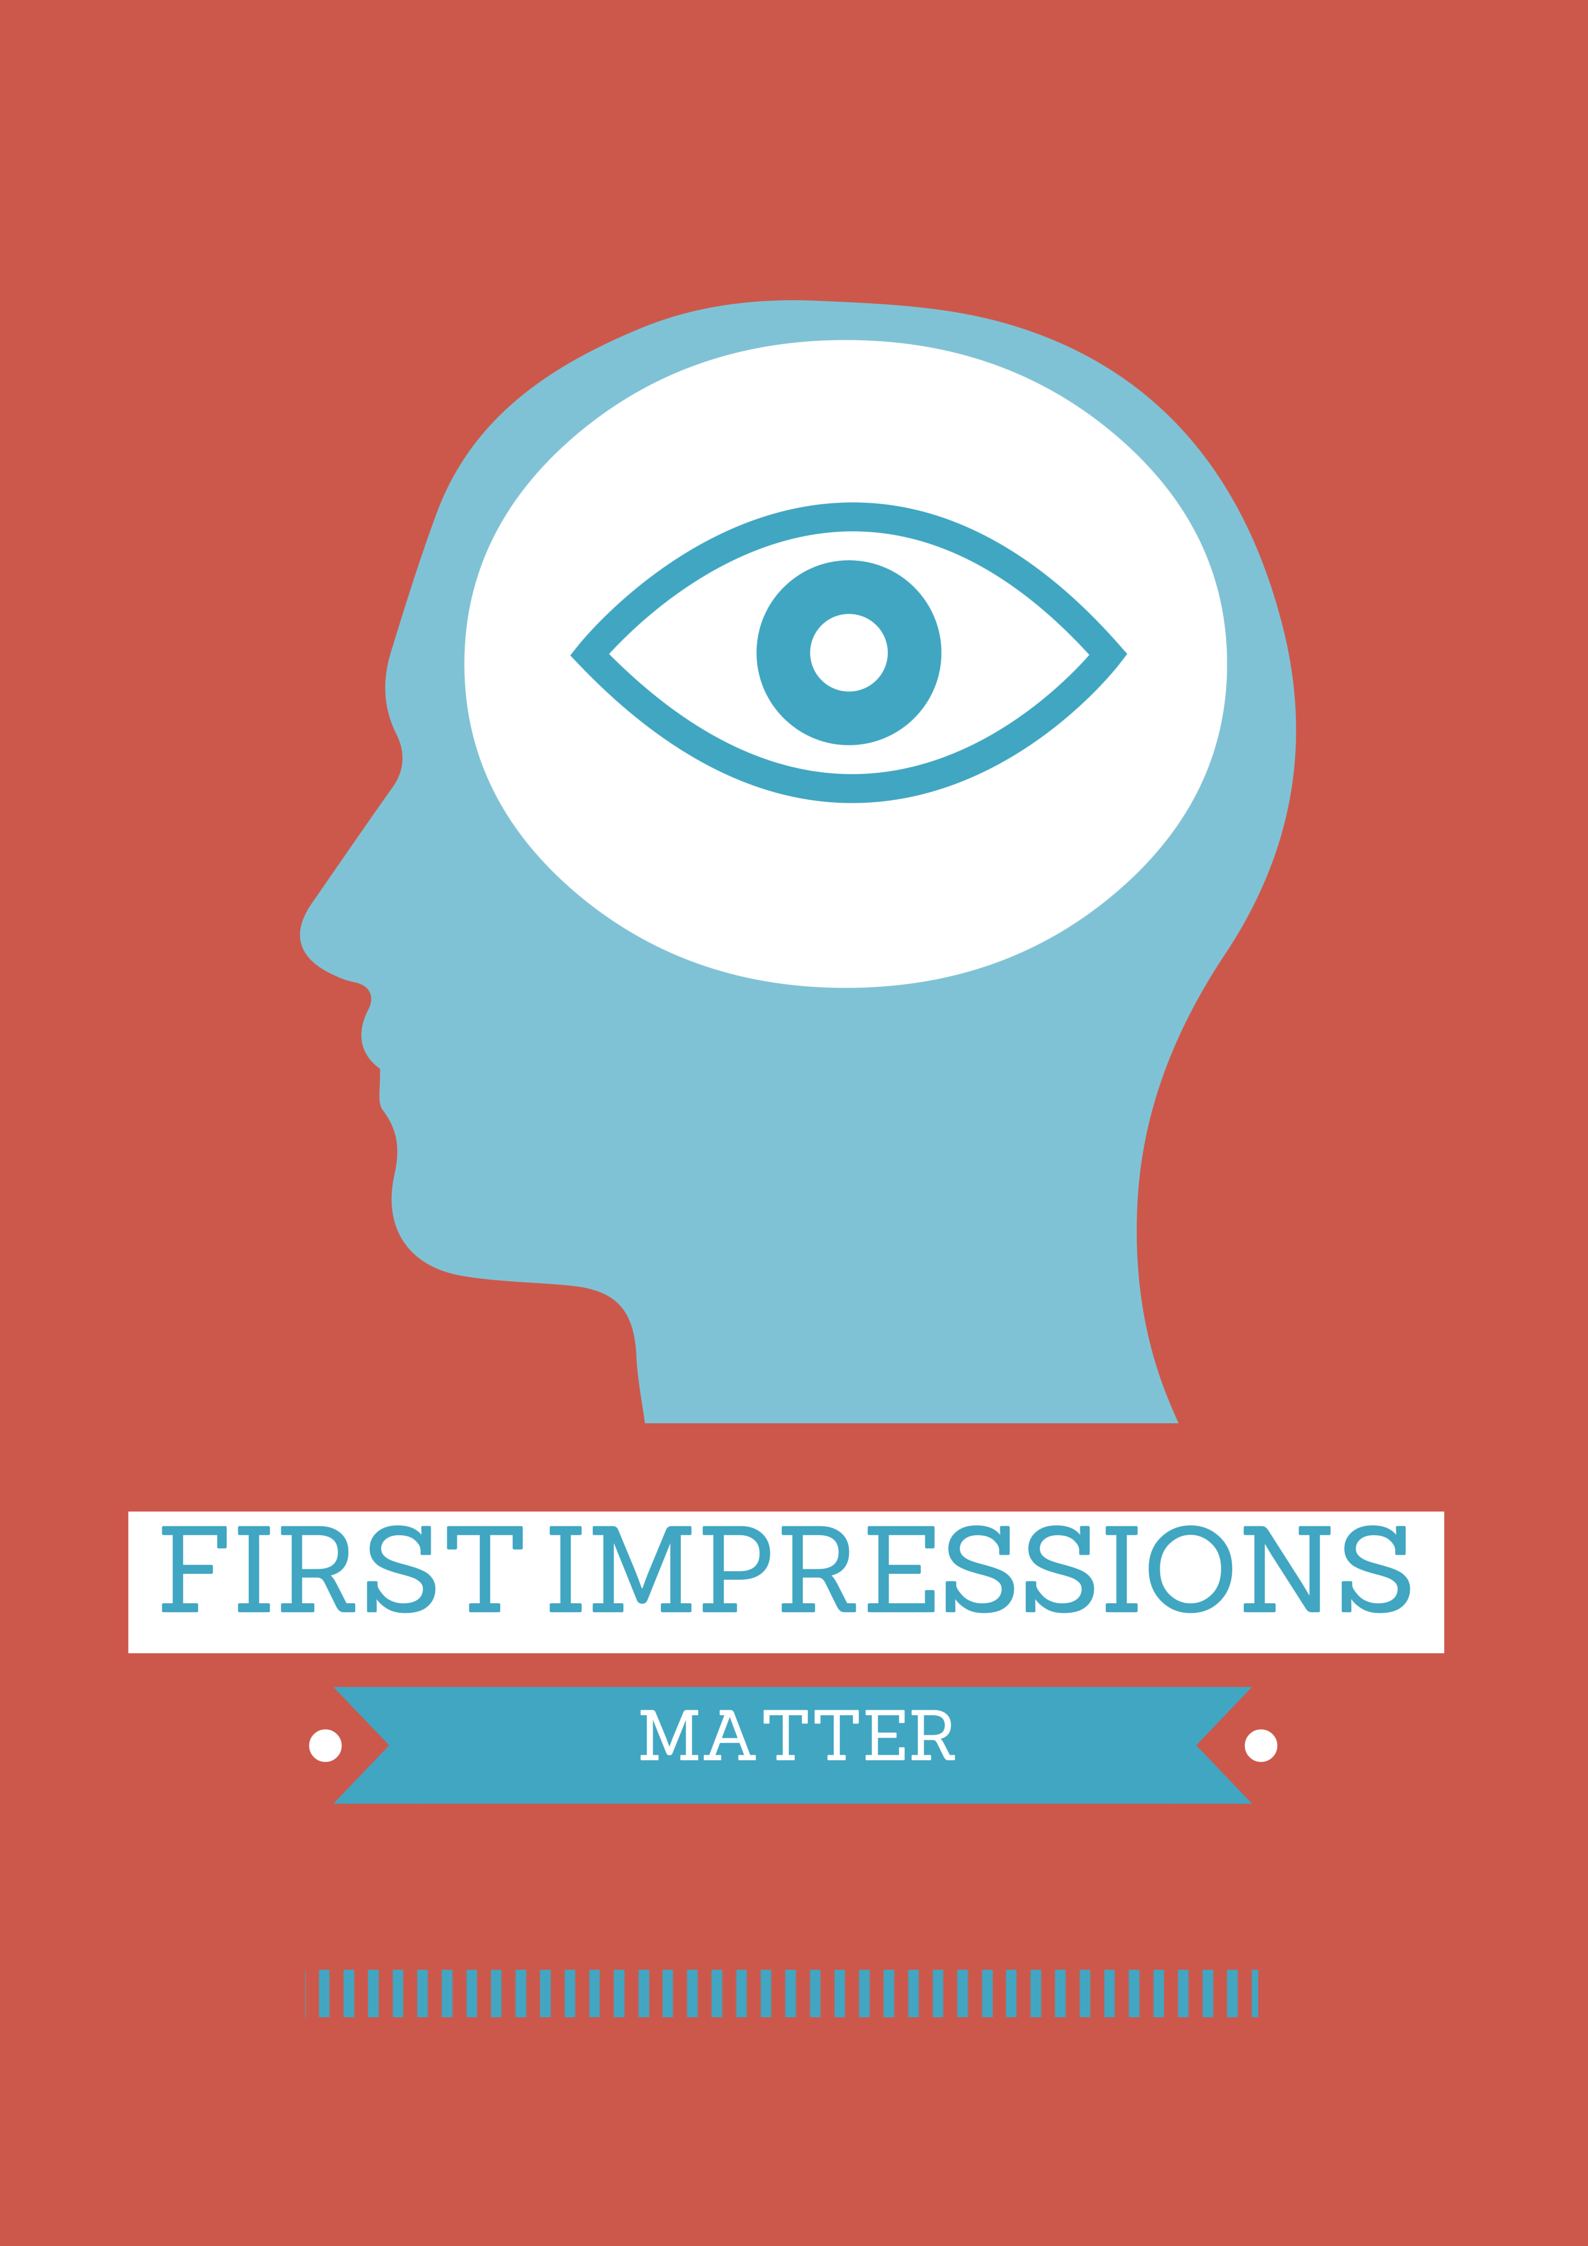 FIRST IMPRESSIONS MATTER poster